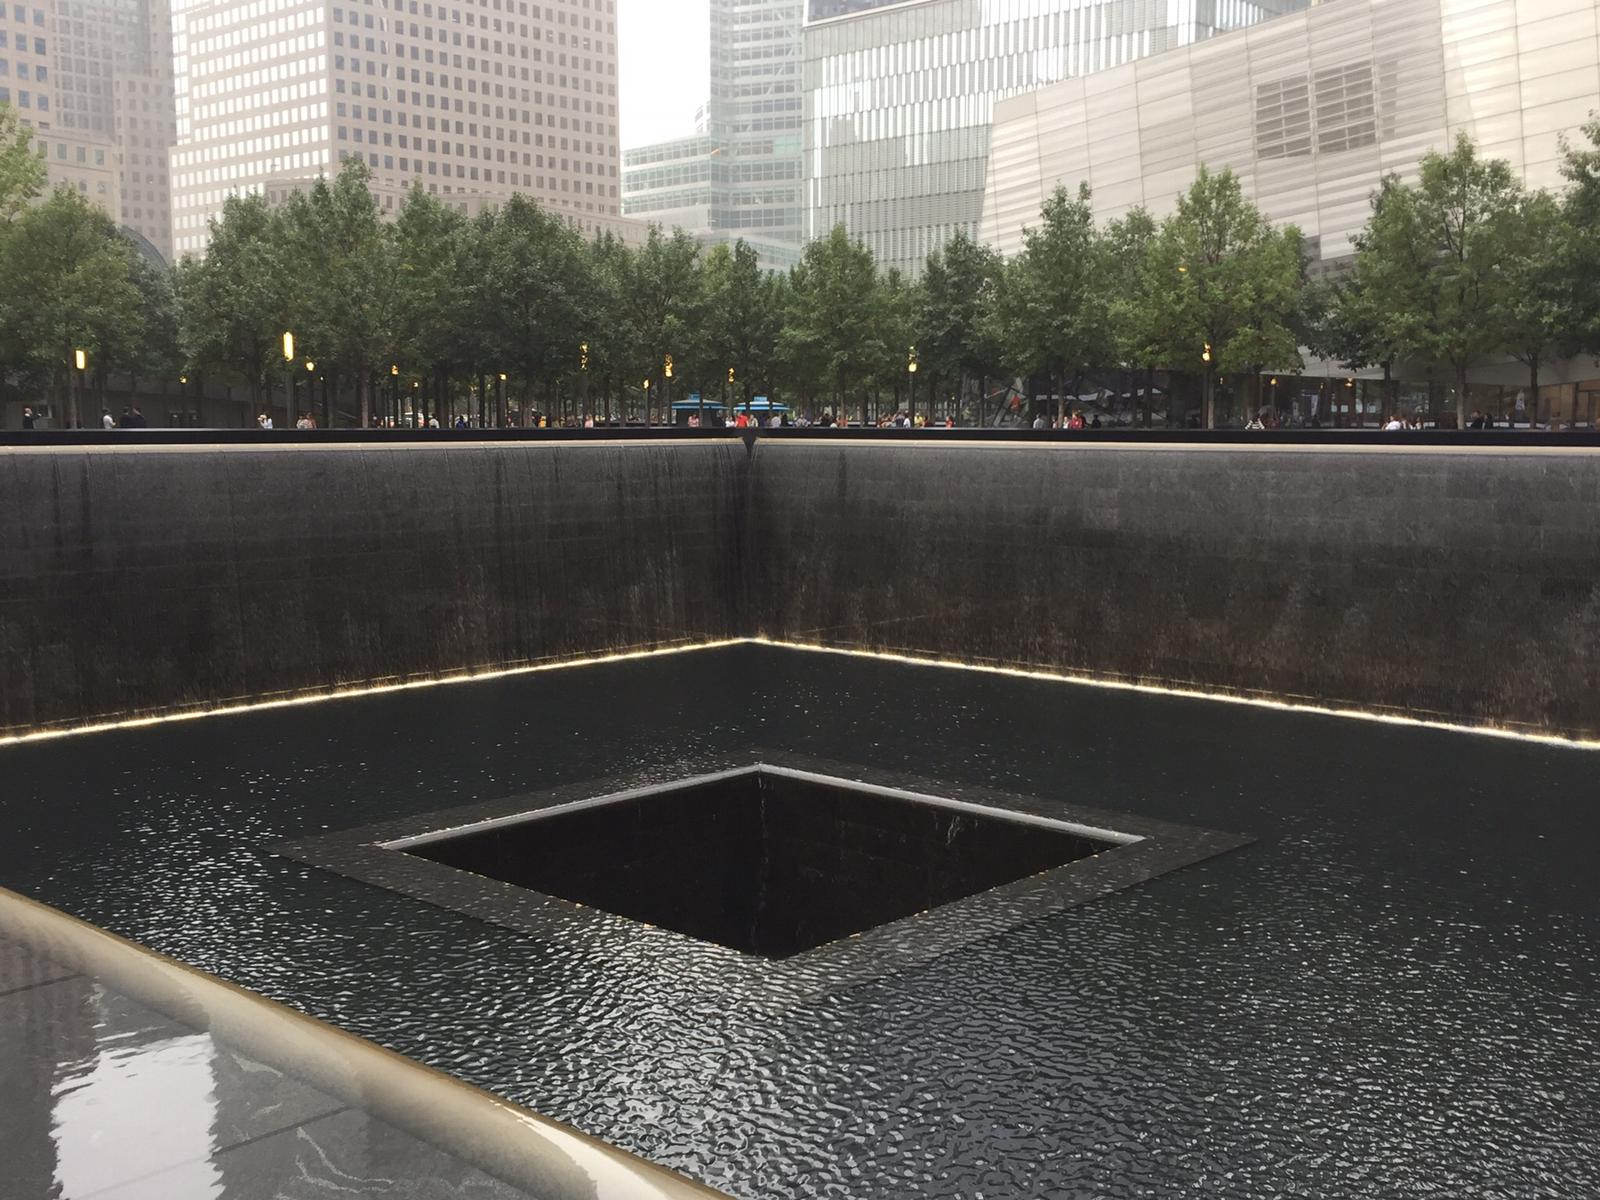 Reflecting Absence, the 9/11 memorial